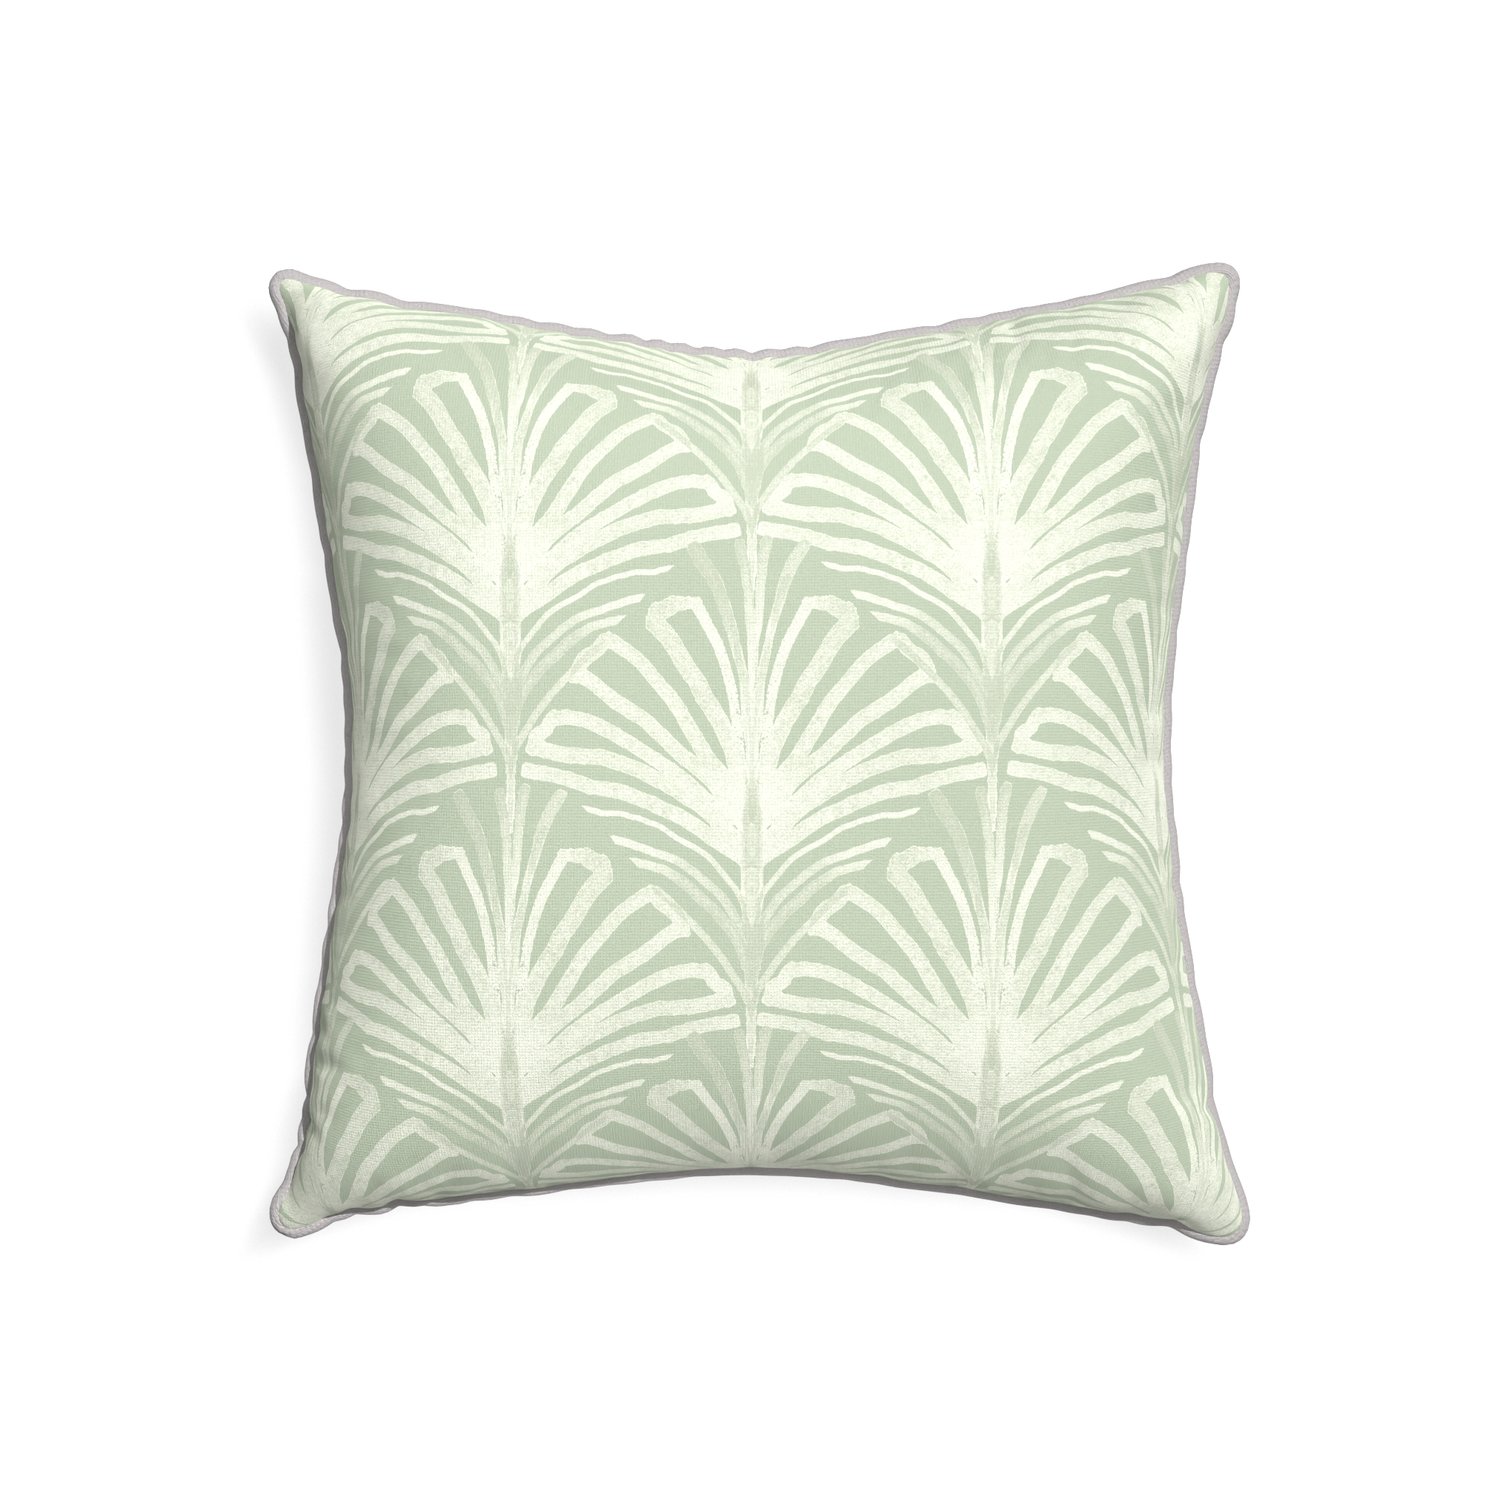 22-square suzy sage custom pillow with pebble piping on white background